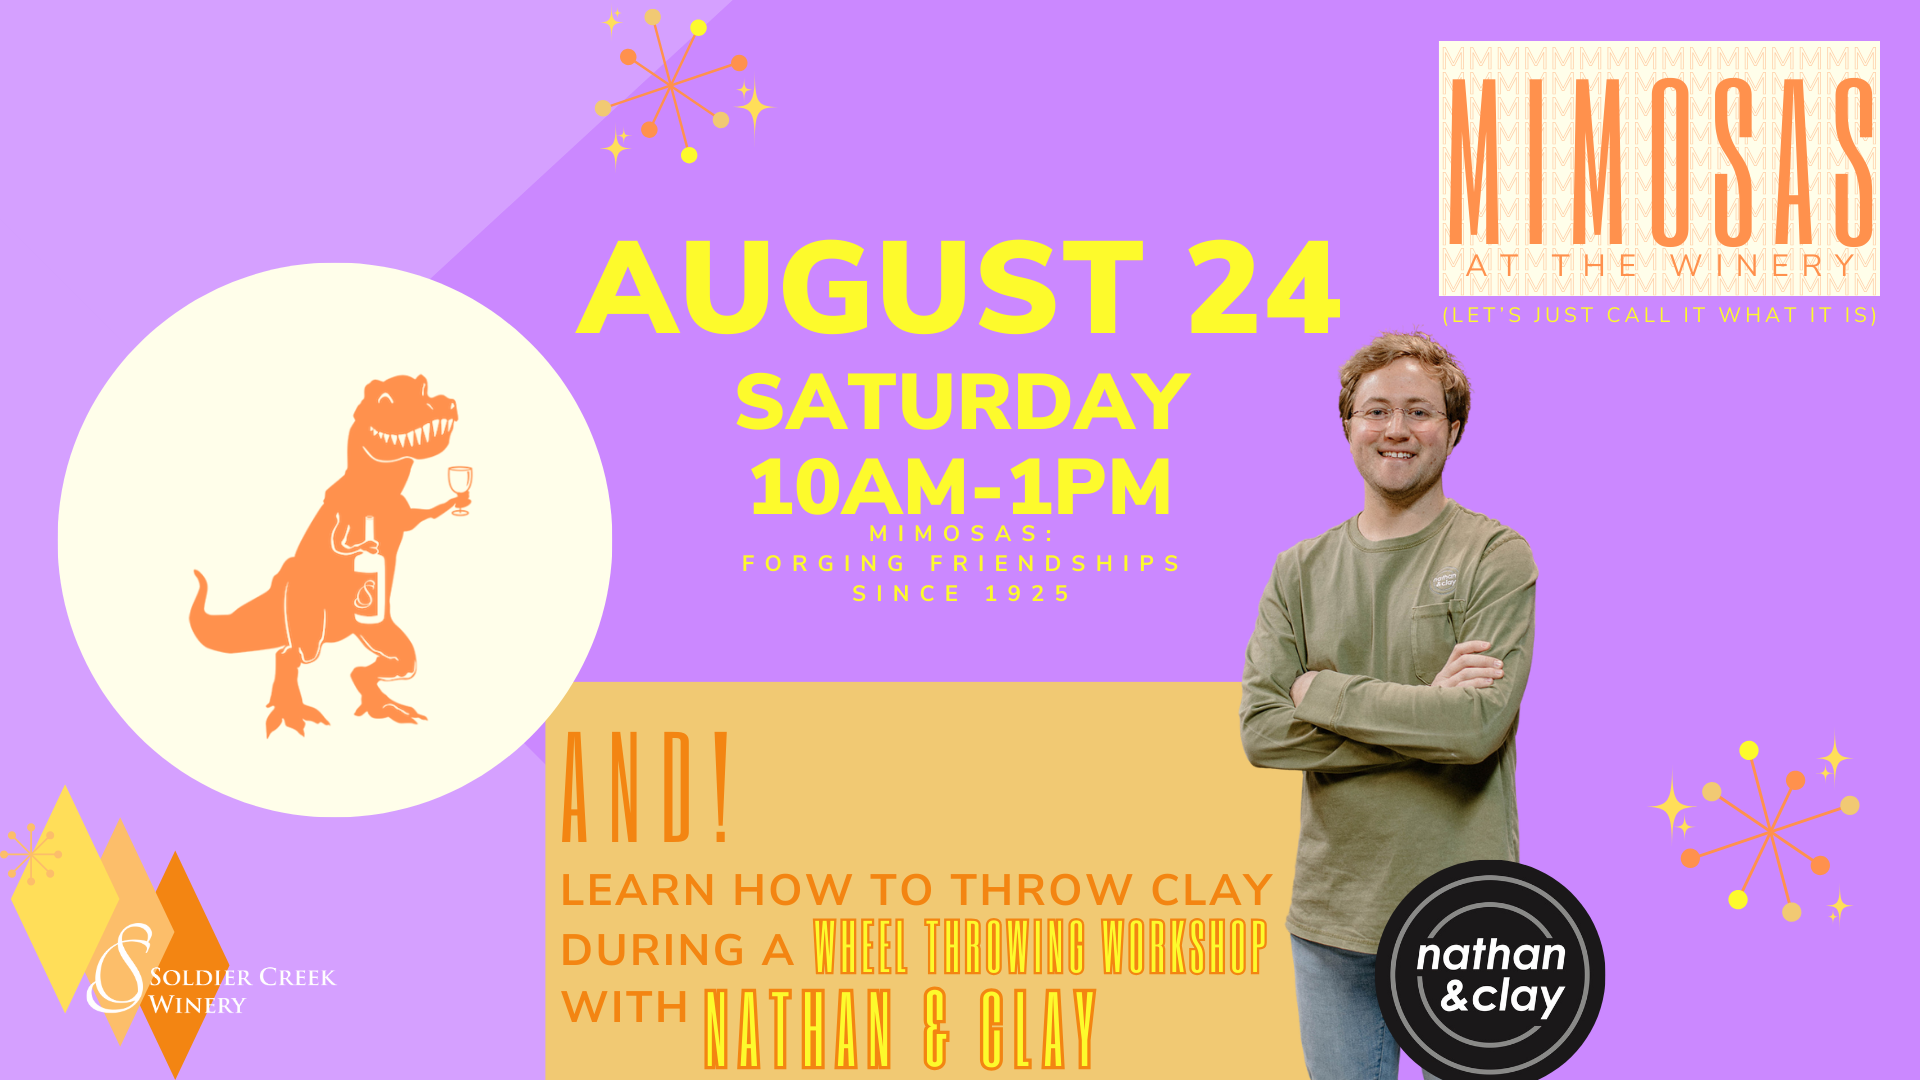 a graphic for "mimosas at the winery". text reads "august 24, saturday 10am-1pm, mimosas forging friendships since 1925. AND! learn how to throw clay during a wheel throwing workshop with nathan and clay."